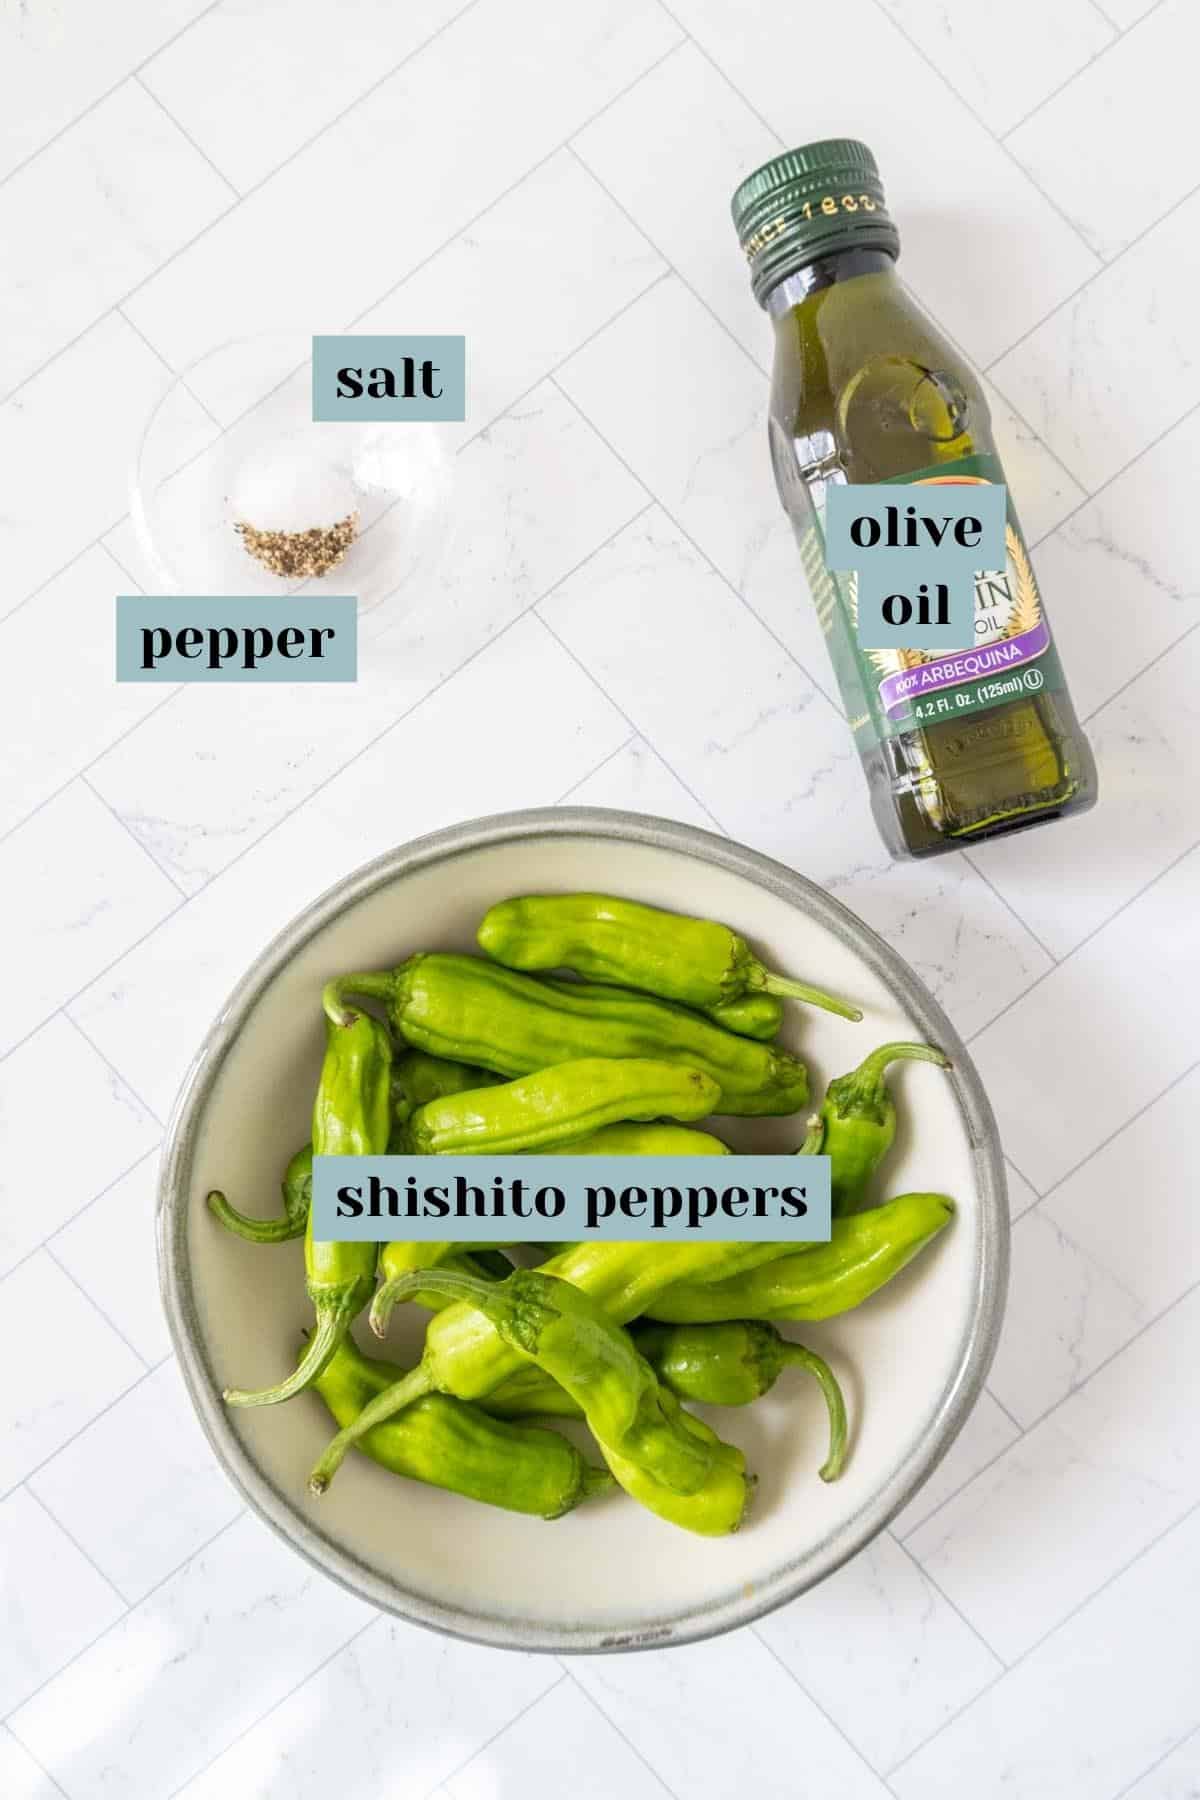 Ingredients for grilled shishito peppers on a tile surface with labels.